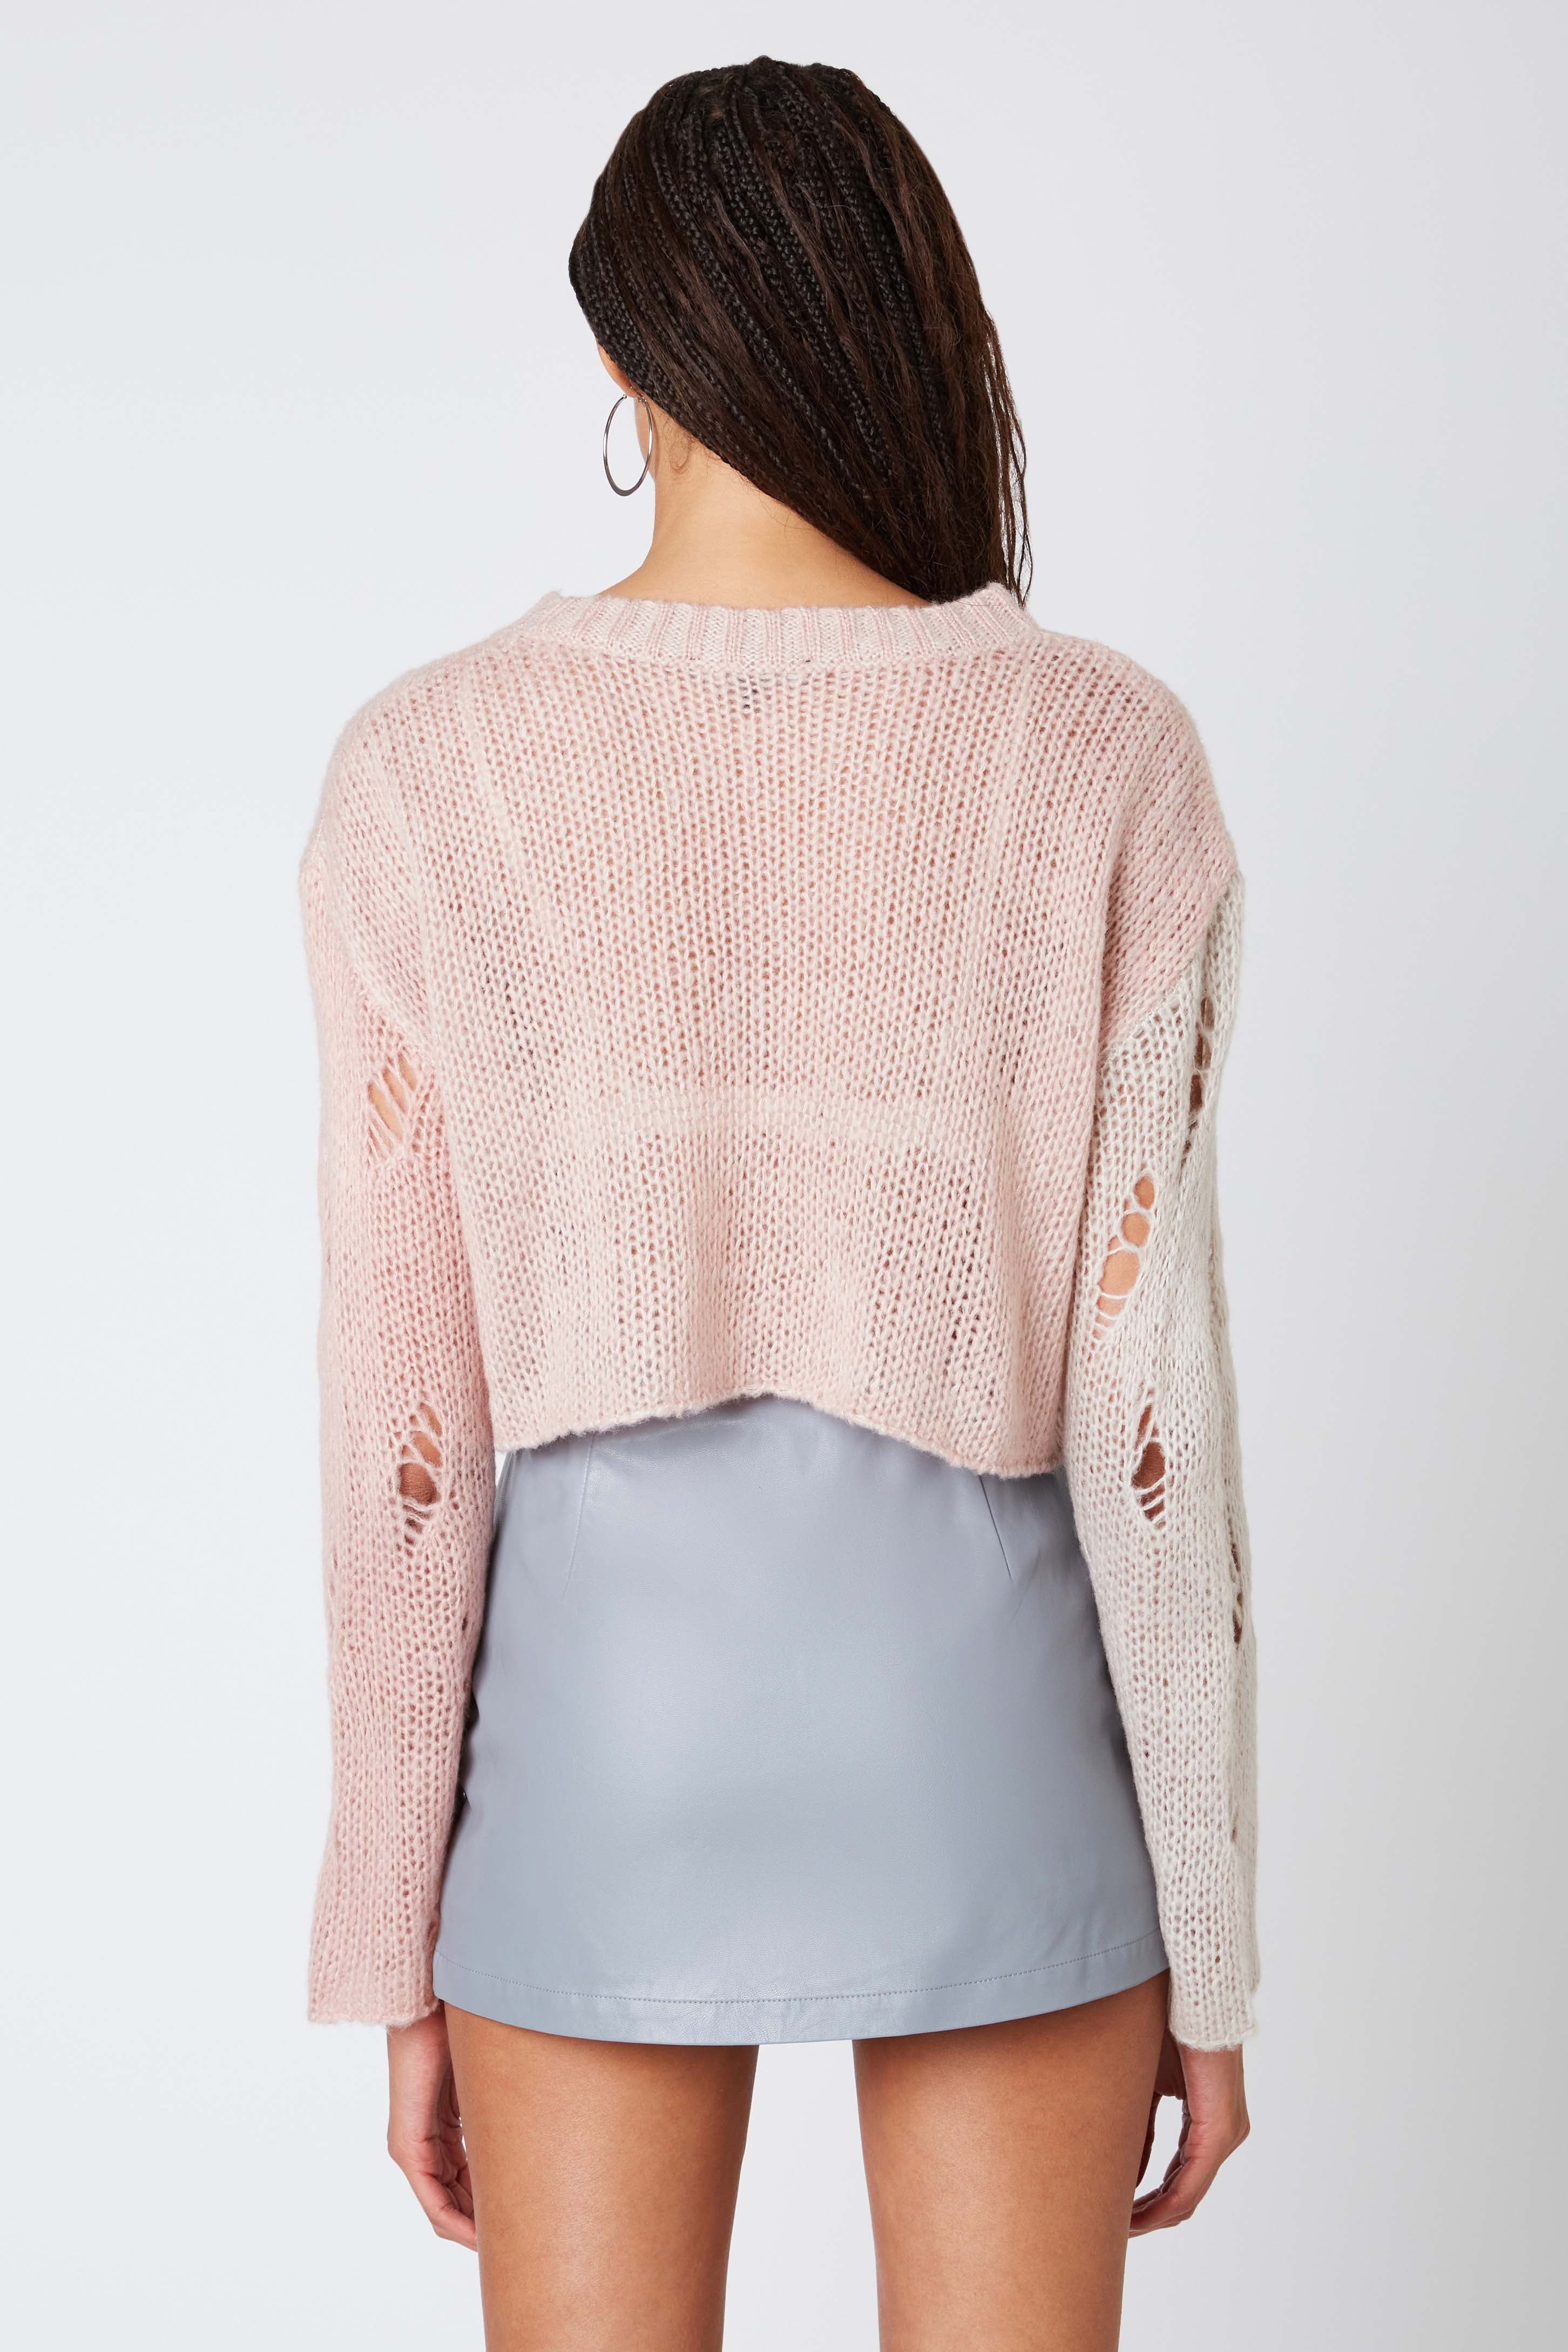 Cropped Knitted Top in Cameo Pink Back View